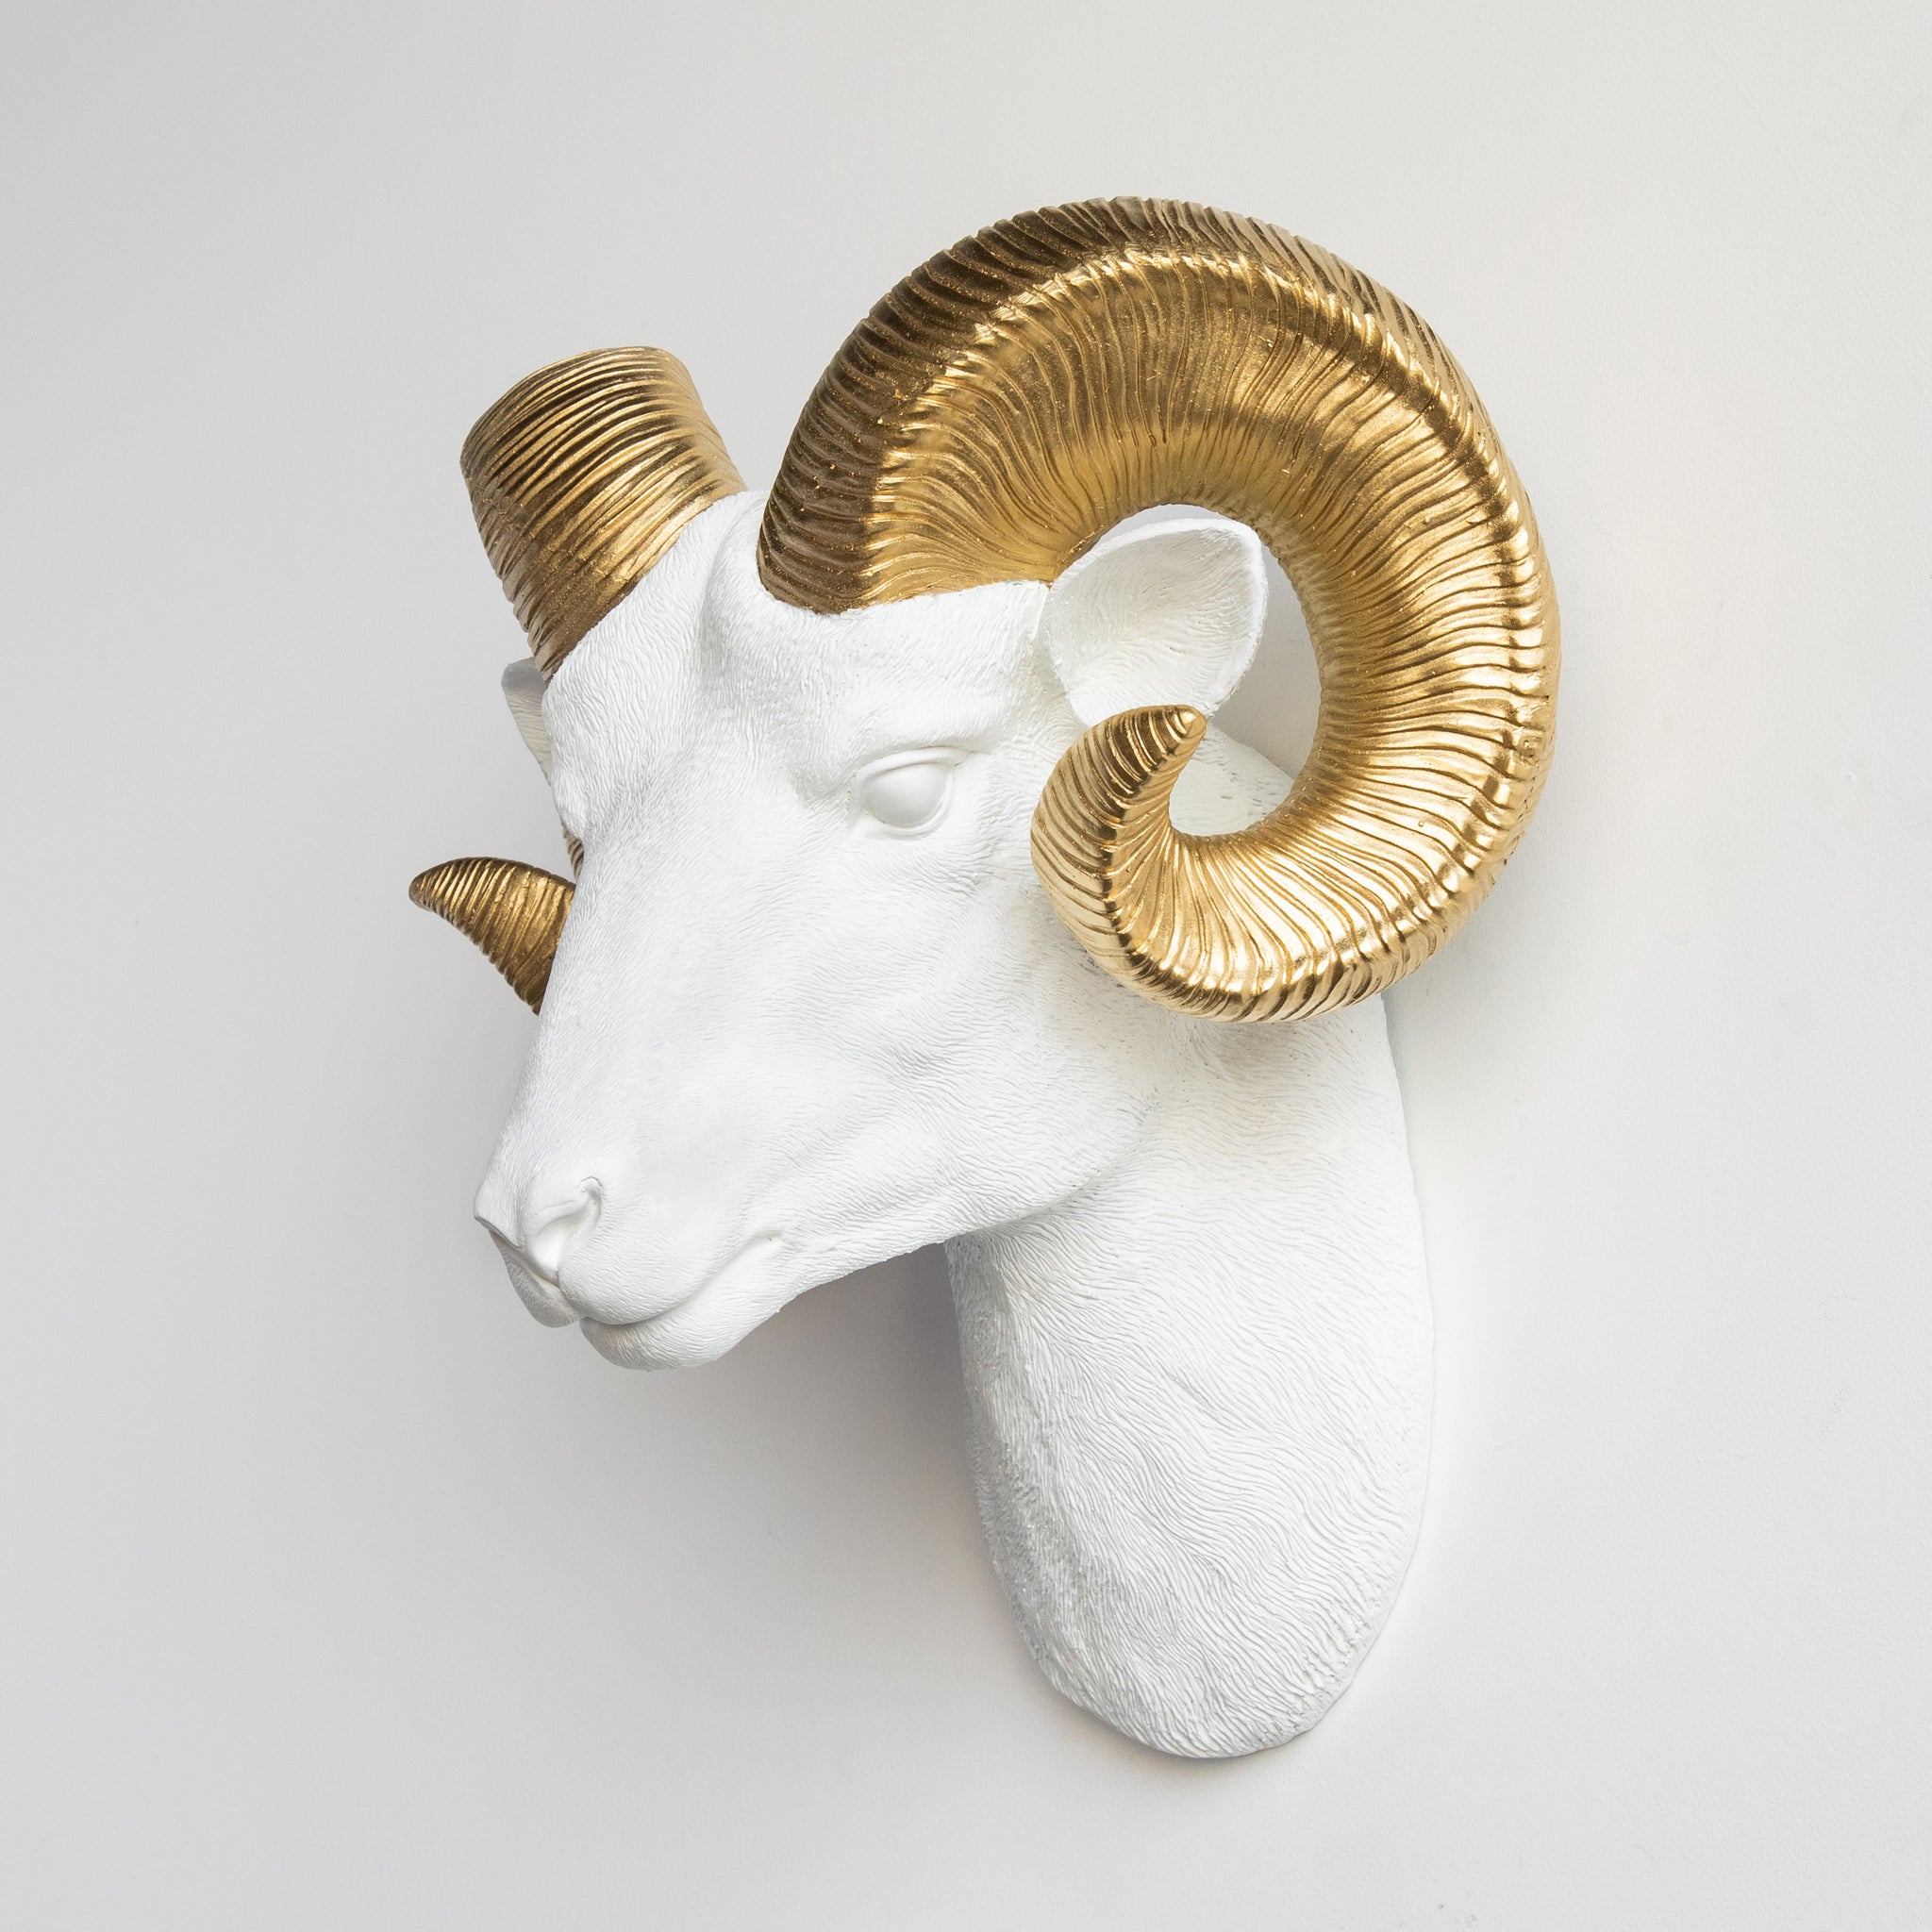 Faux Ram Wall Mount // White with Gold Horns